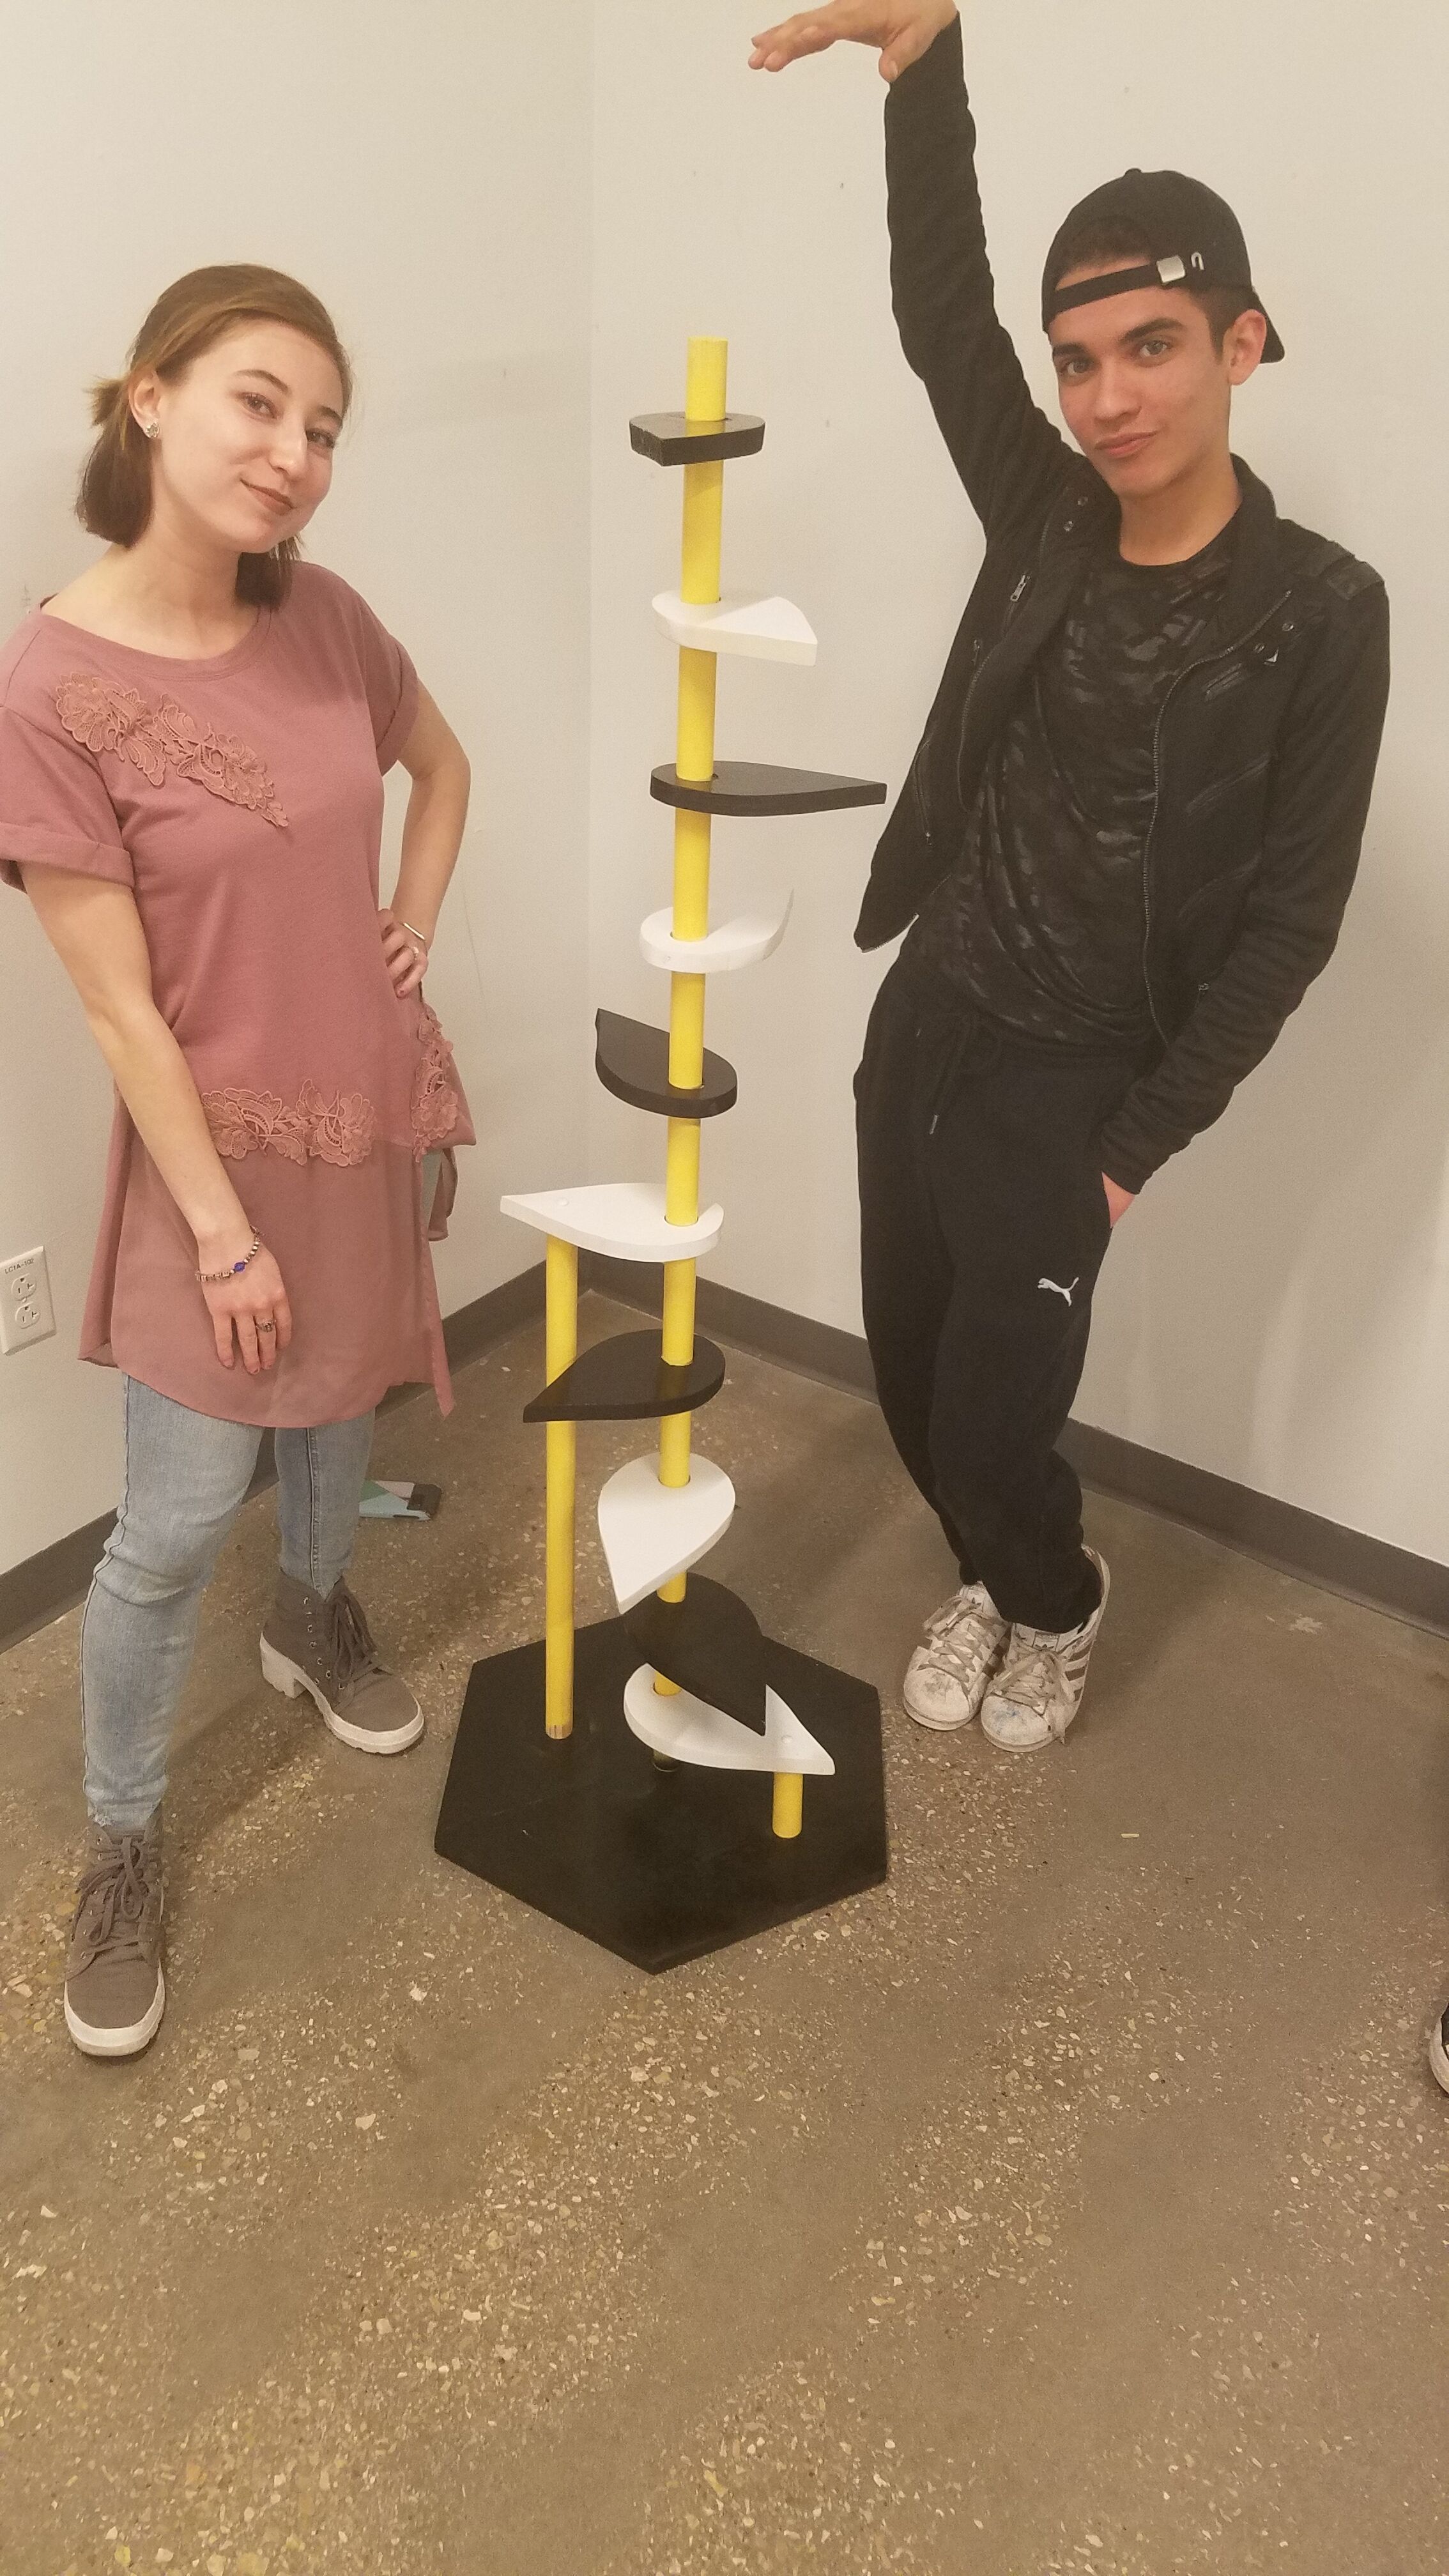 Art students Olivia Jennings and Ivy Cruz pose with their sculpture